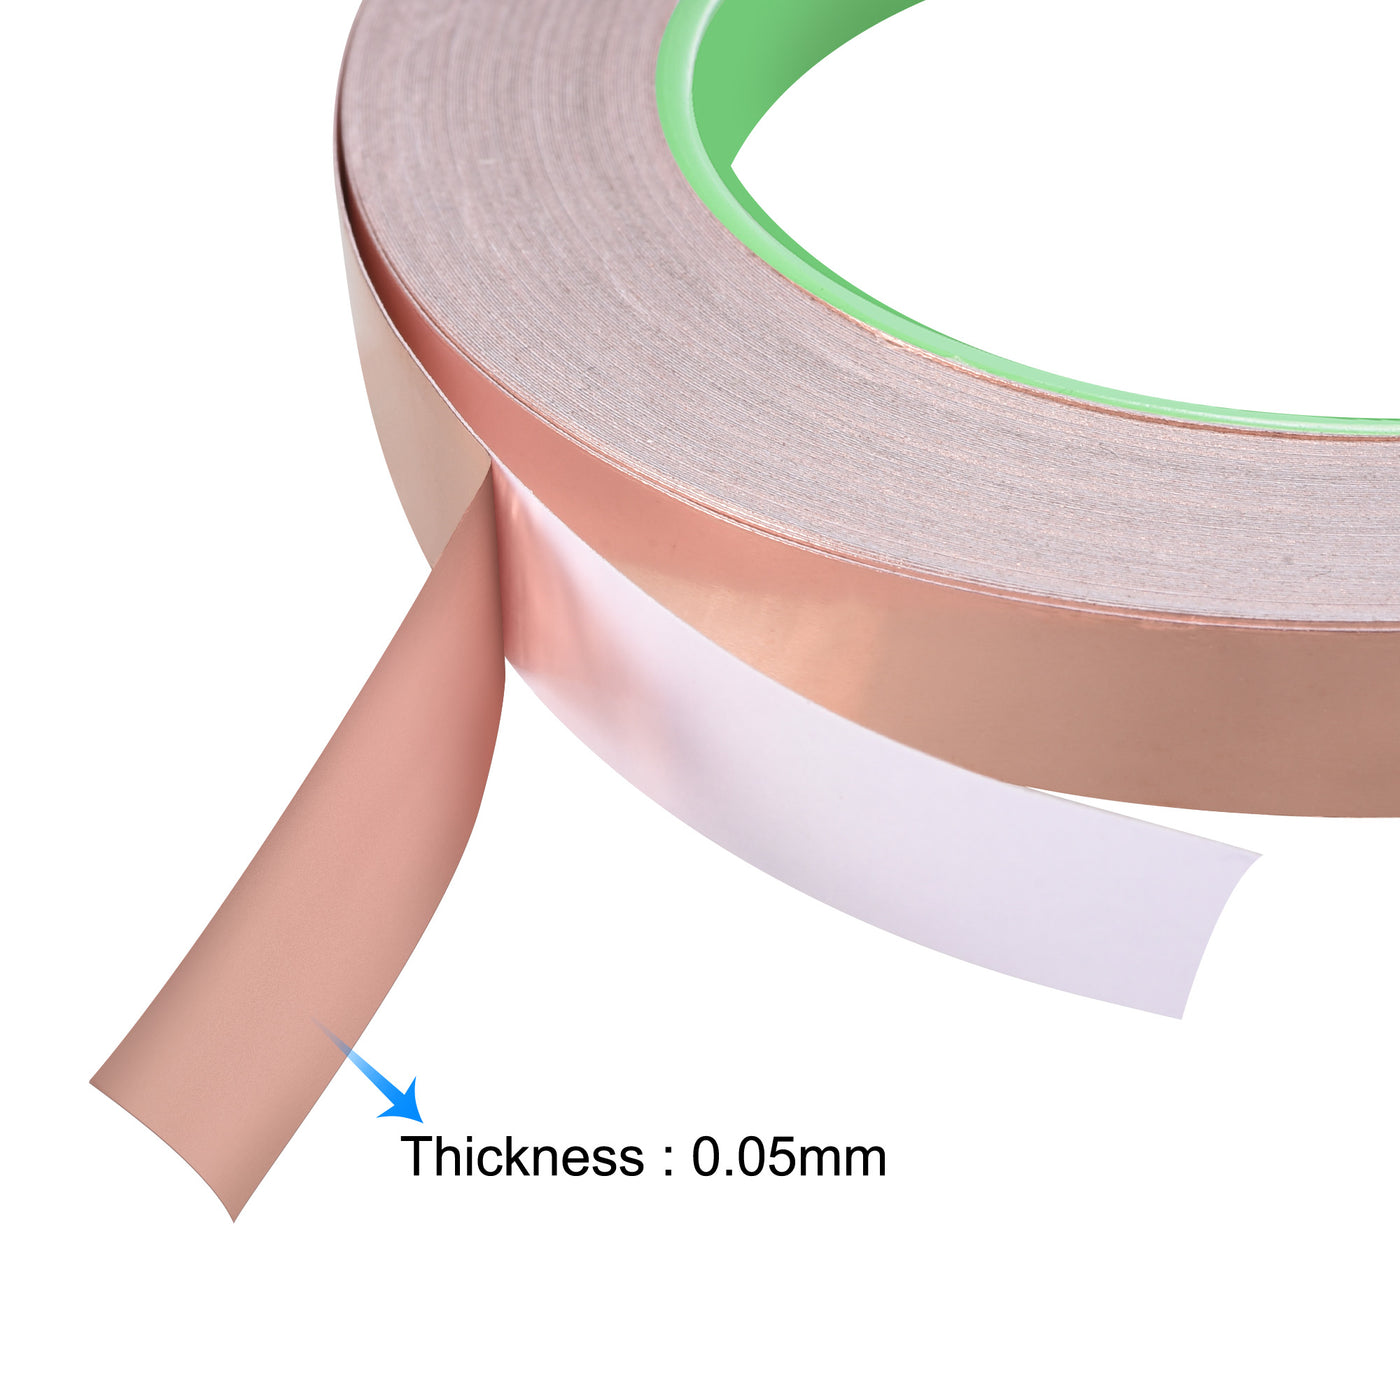 uxcell Uxcell Double-Sided Conductive Tape Copper Foil Tape 8mm x 30m/98.4ft 1pcs